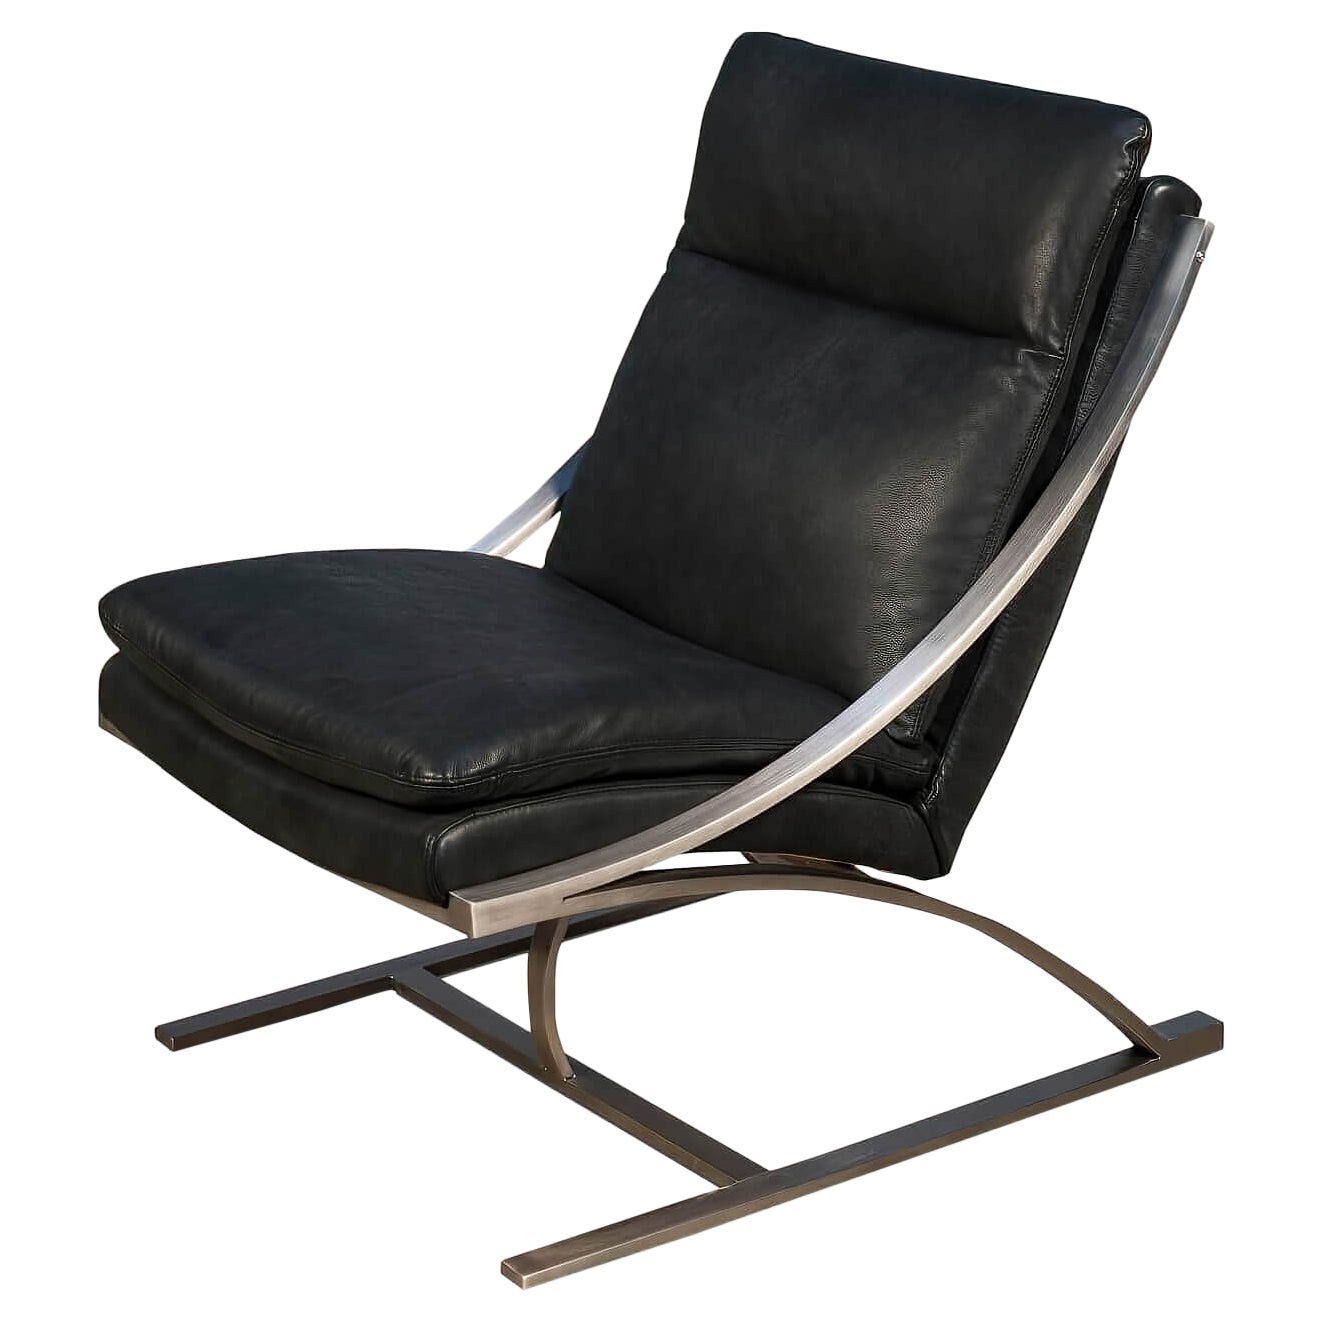 Modern Stainless Steel and Black Leather Chair